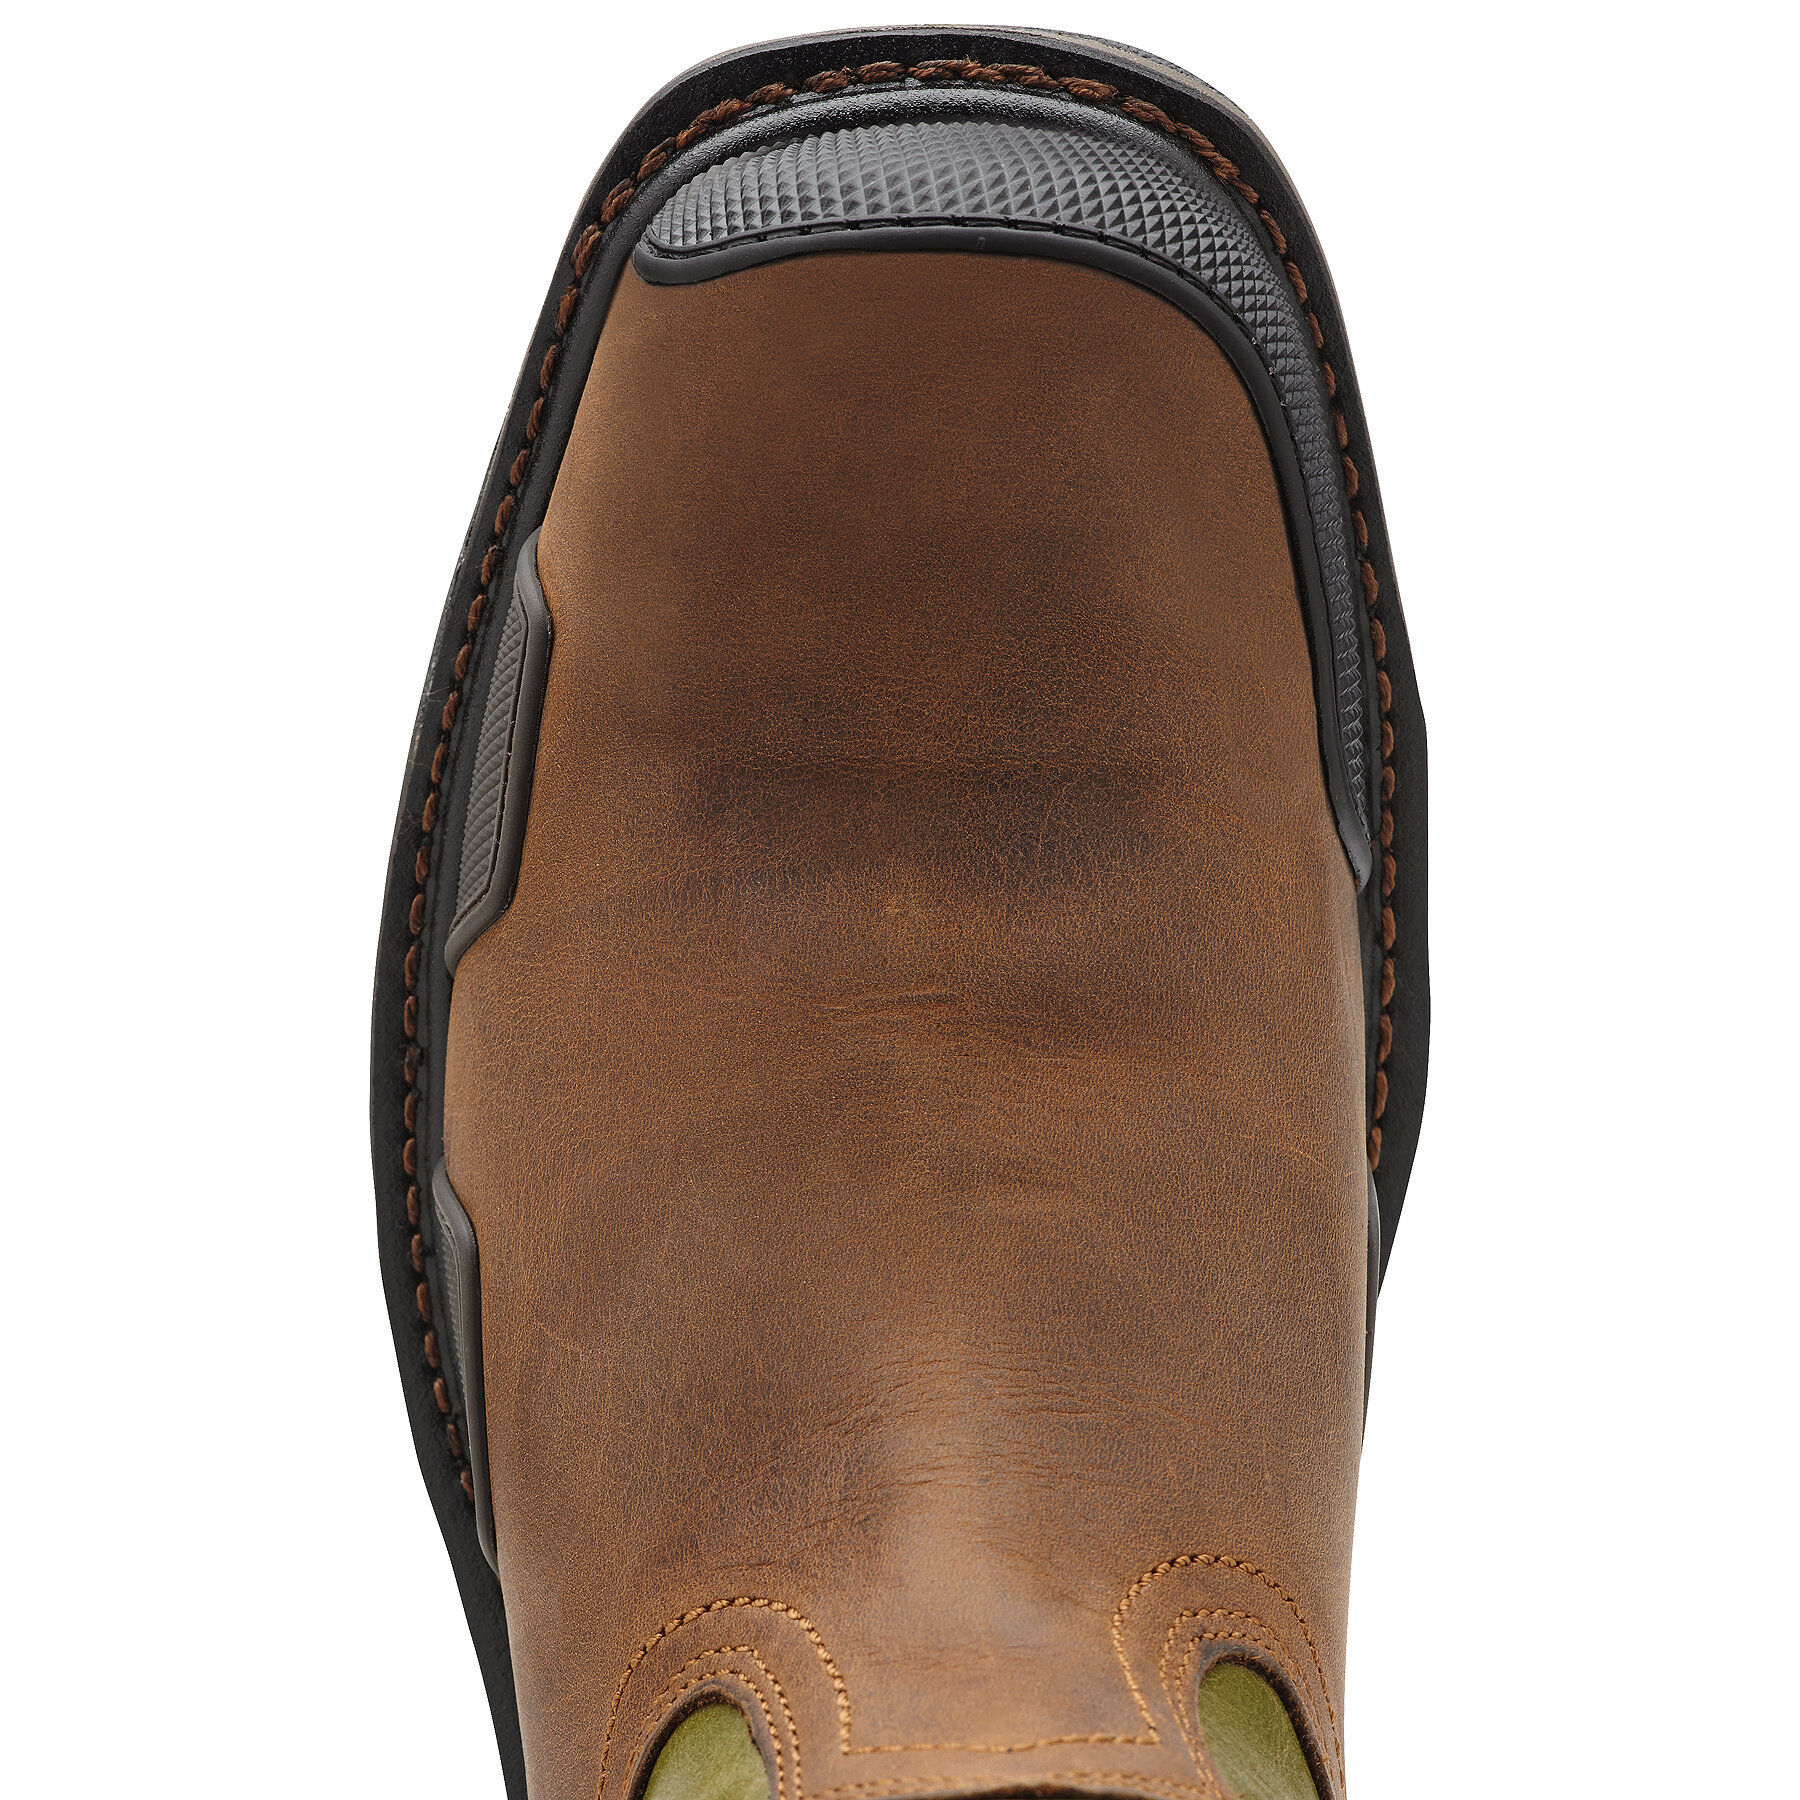 ariat overdrive boots